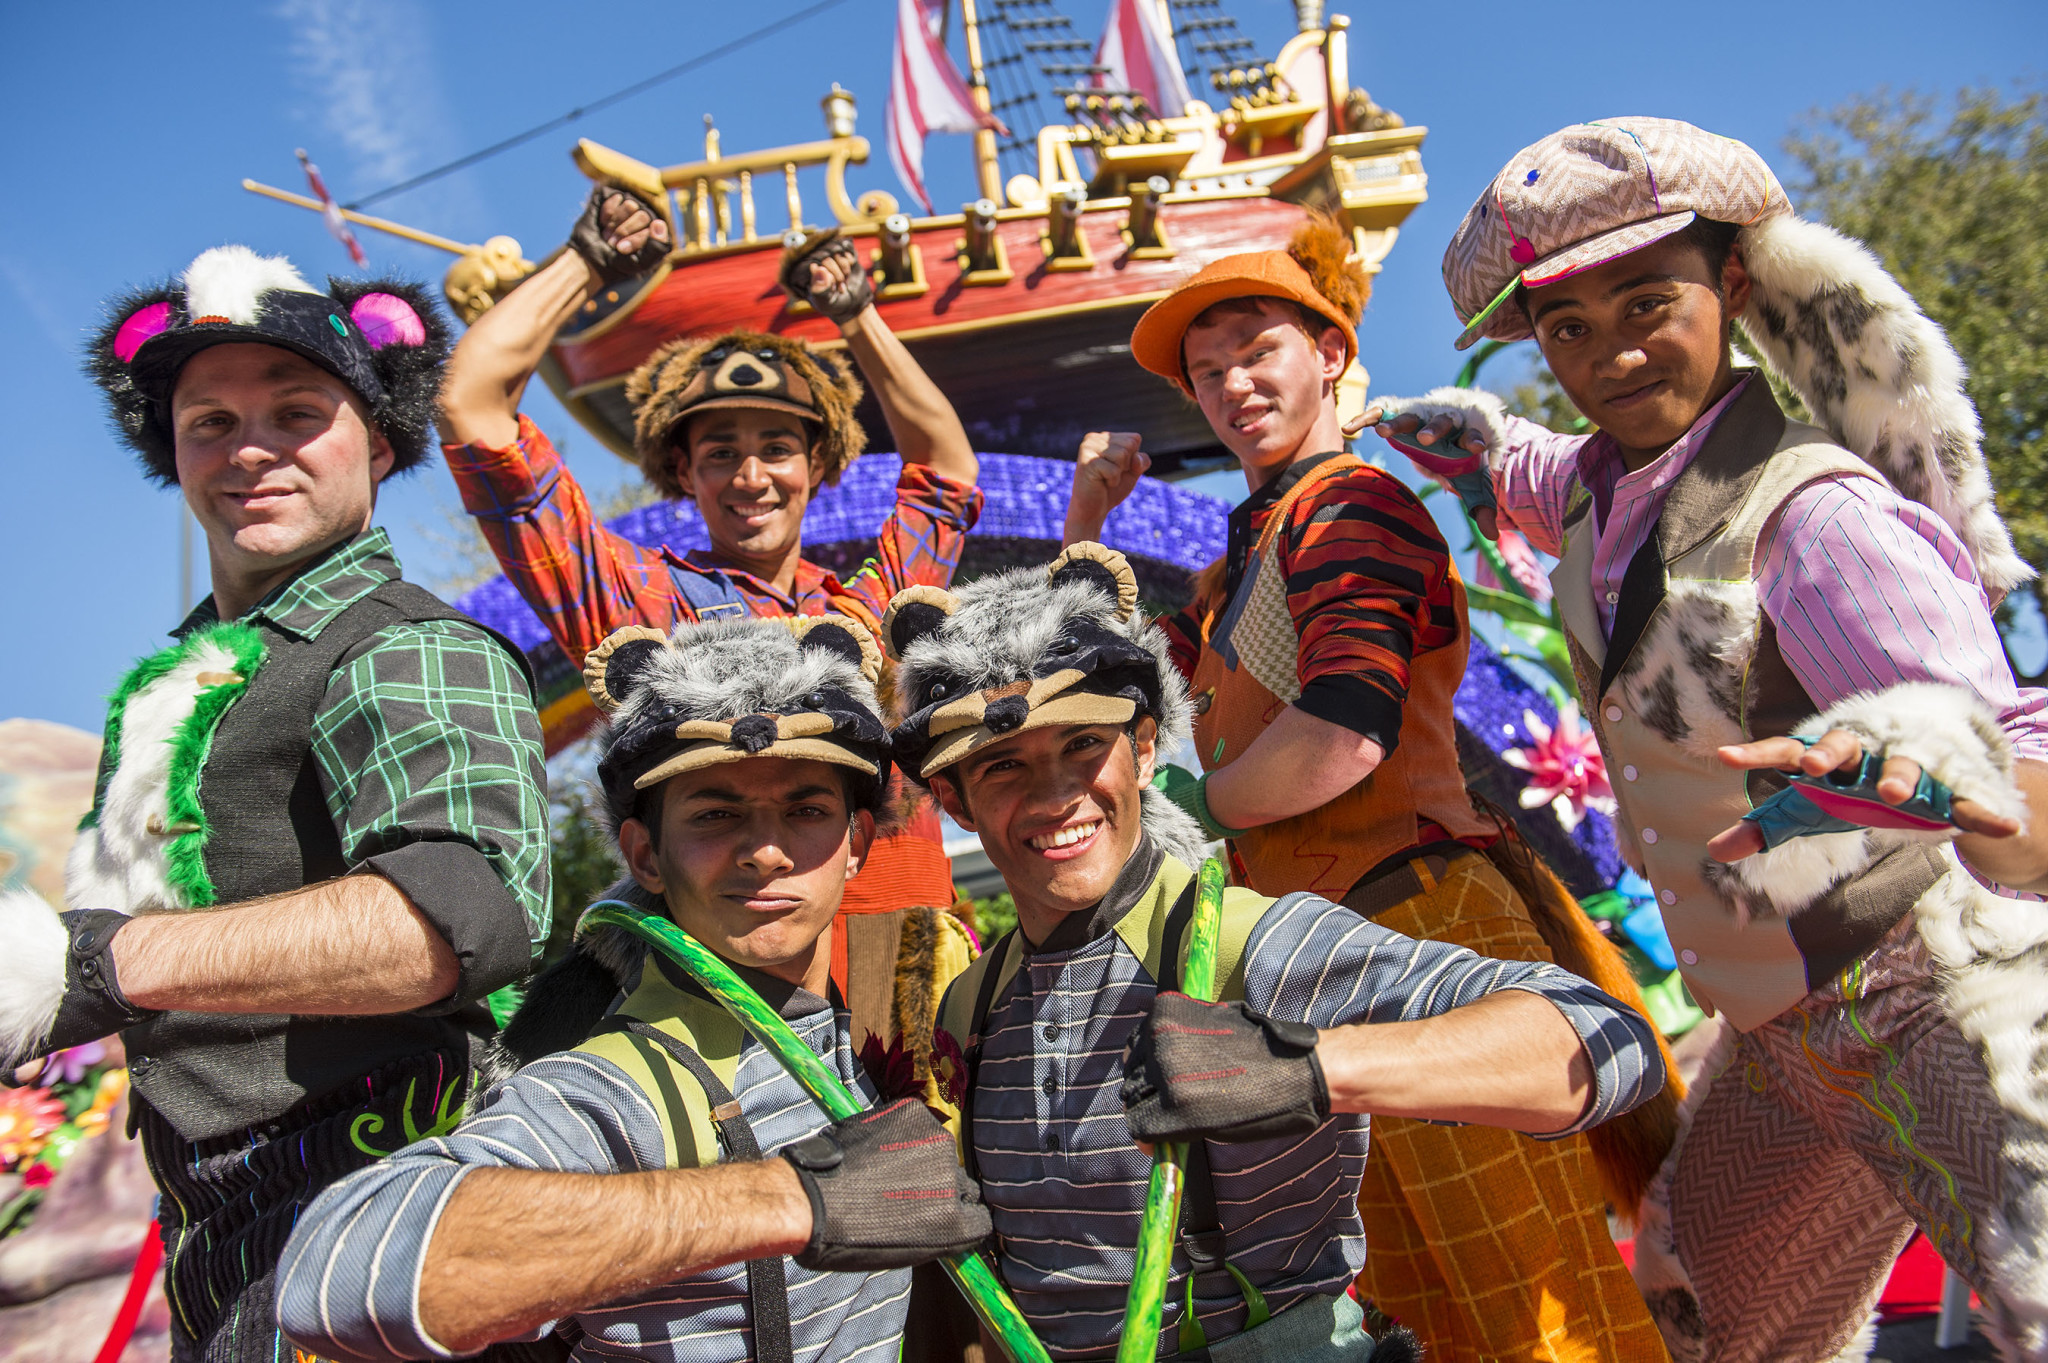 Festival of Fantasy to debut on March 9th, 2014